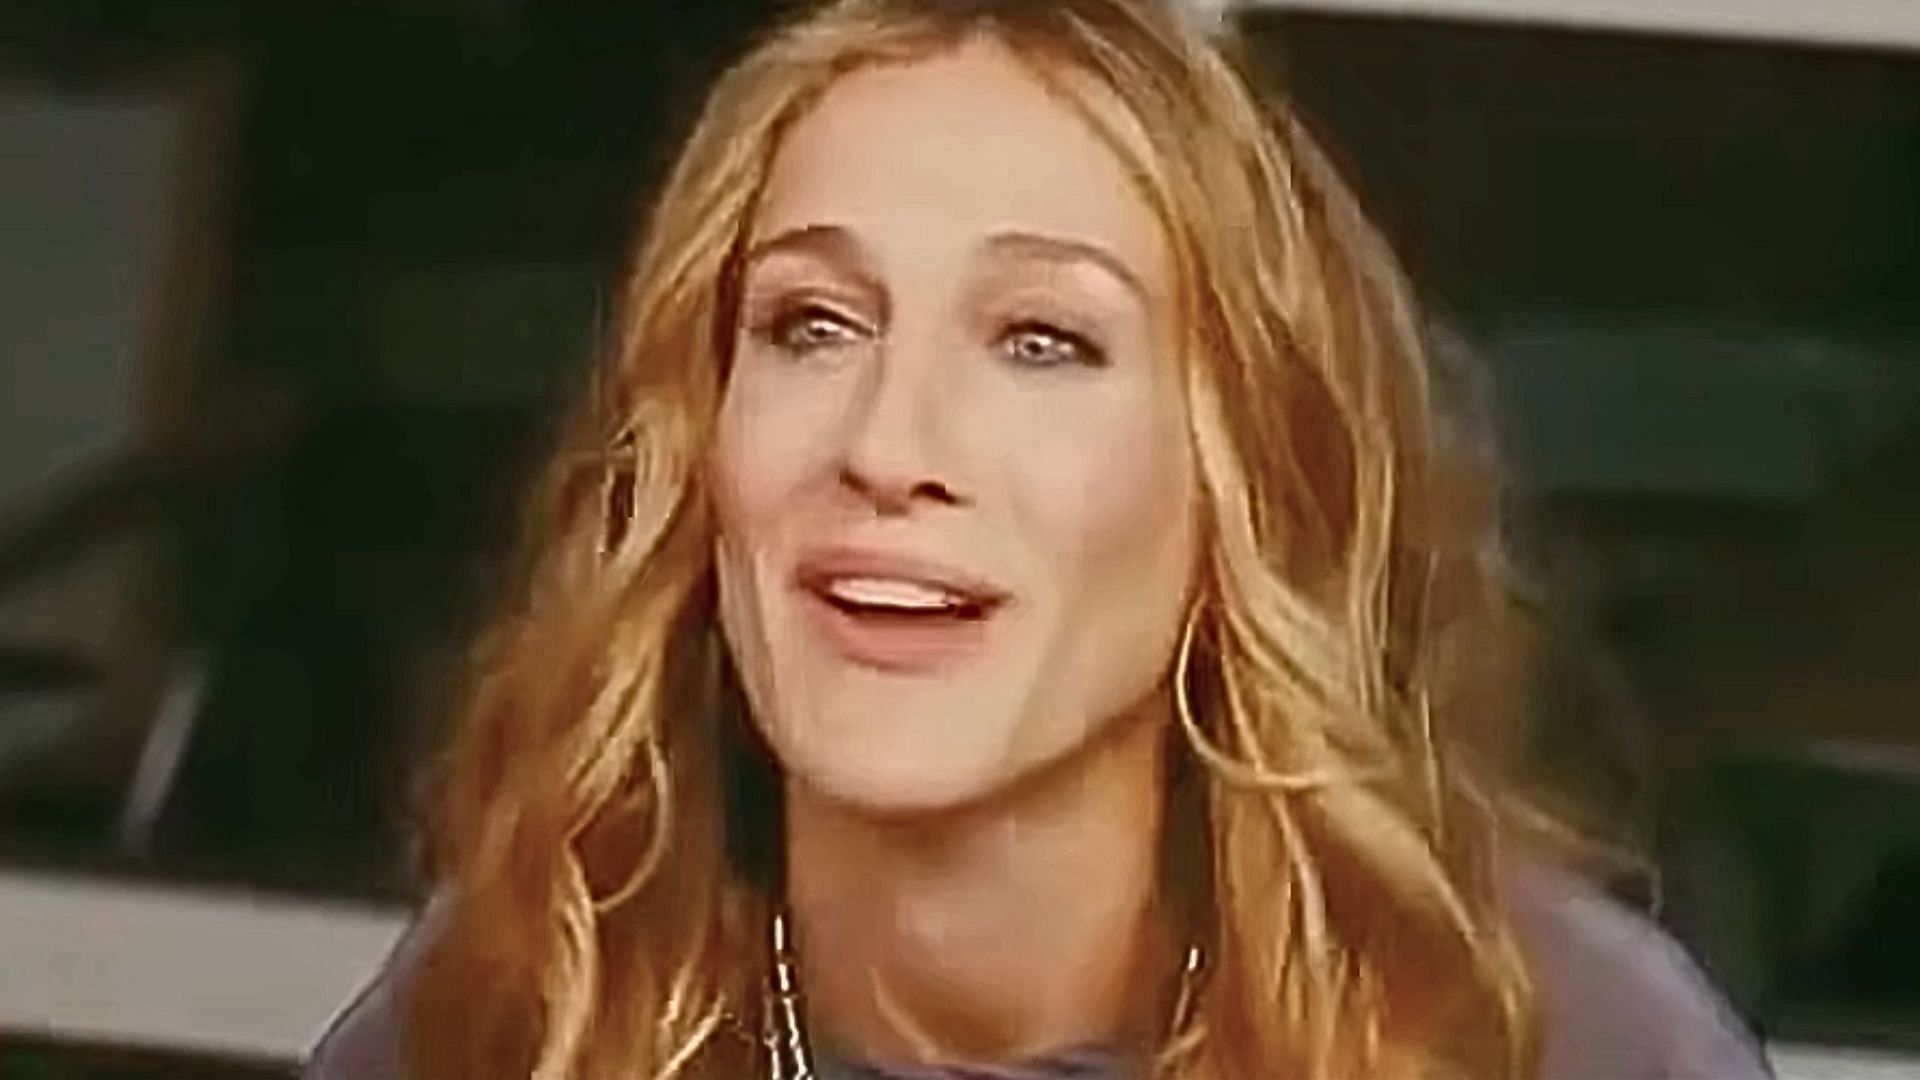 Carrie Bradshaw, played by Sarah Jessica Parker (Image via YouTube/Rotten Tomatoes Classic Trailers)